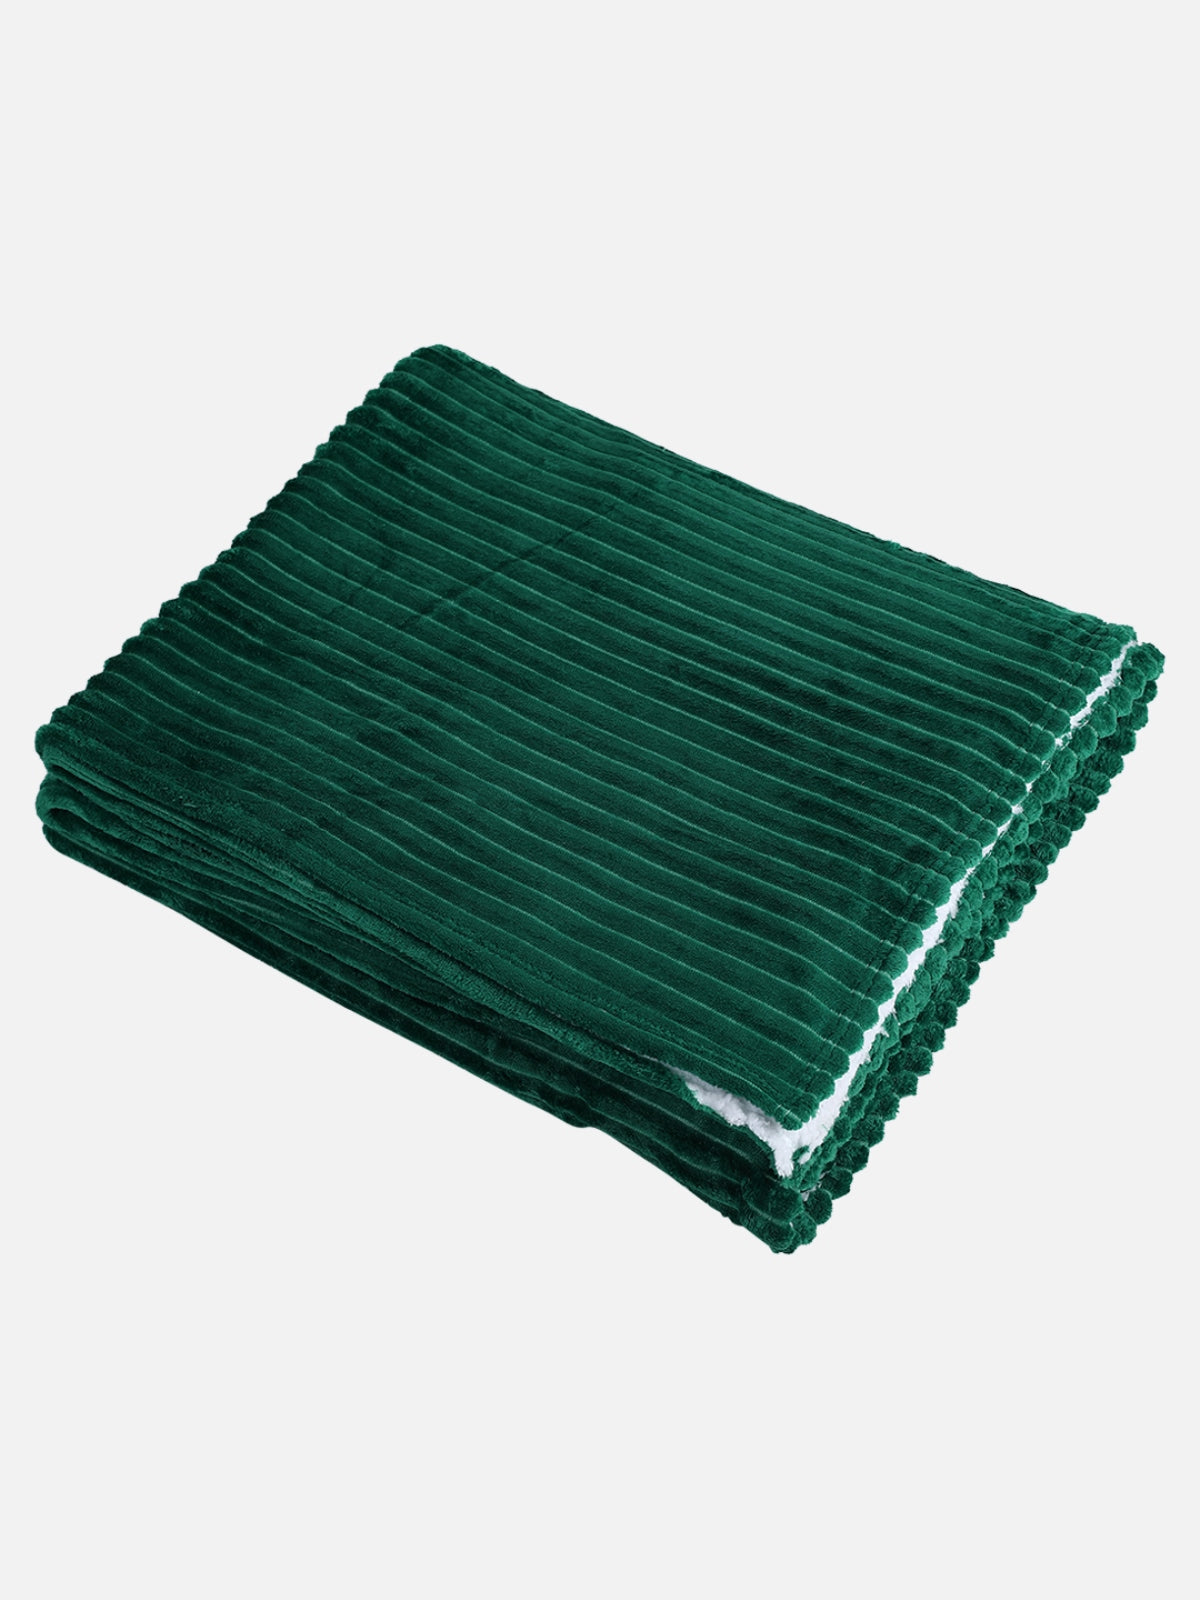 Green 500 GSM Double Bed Stripes Patterned Sherpa Wool Blanket